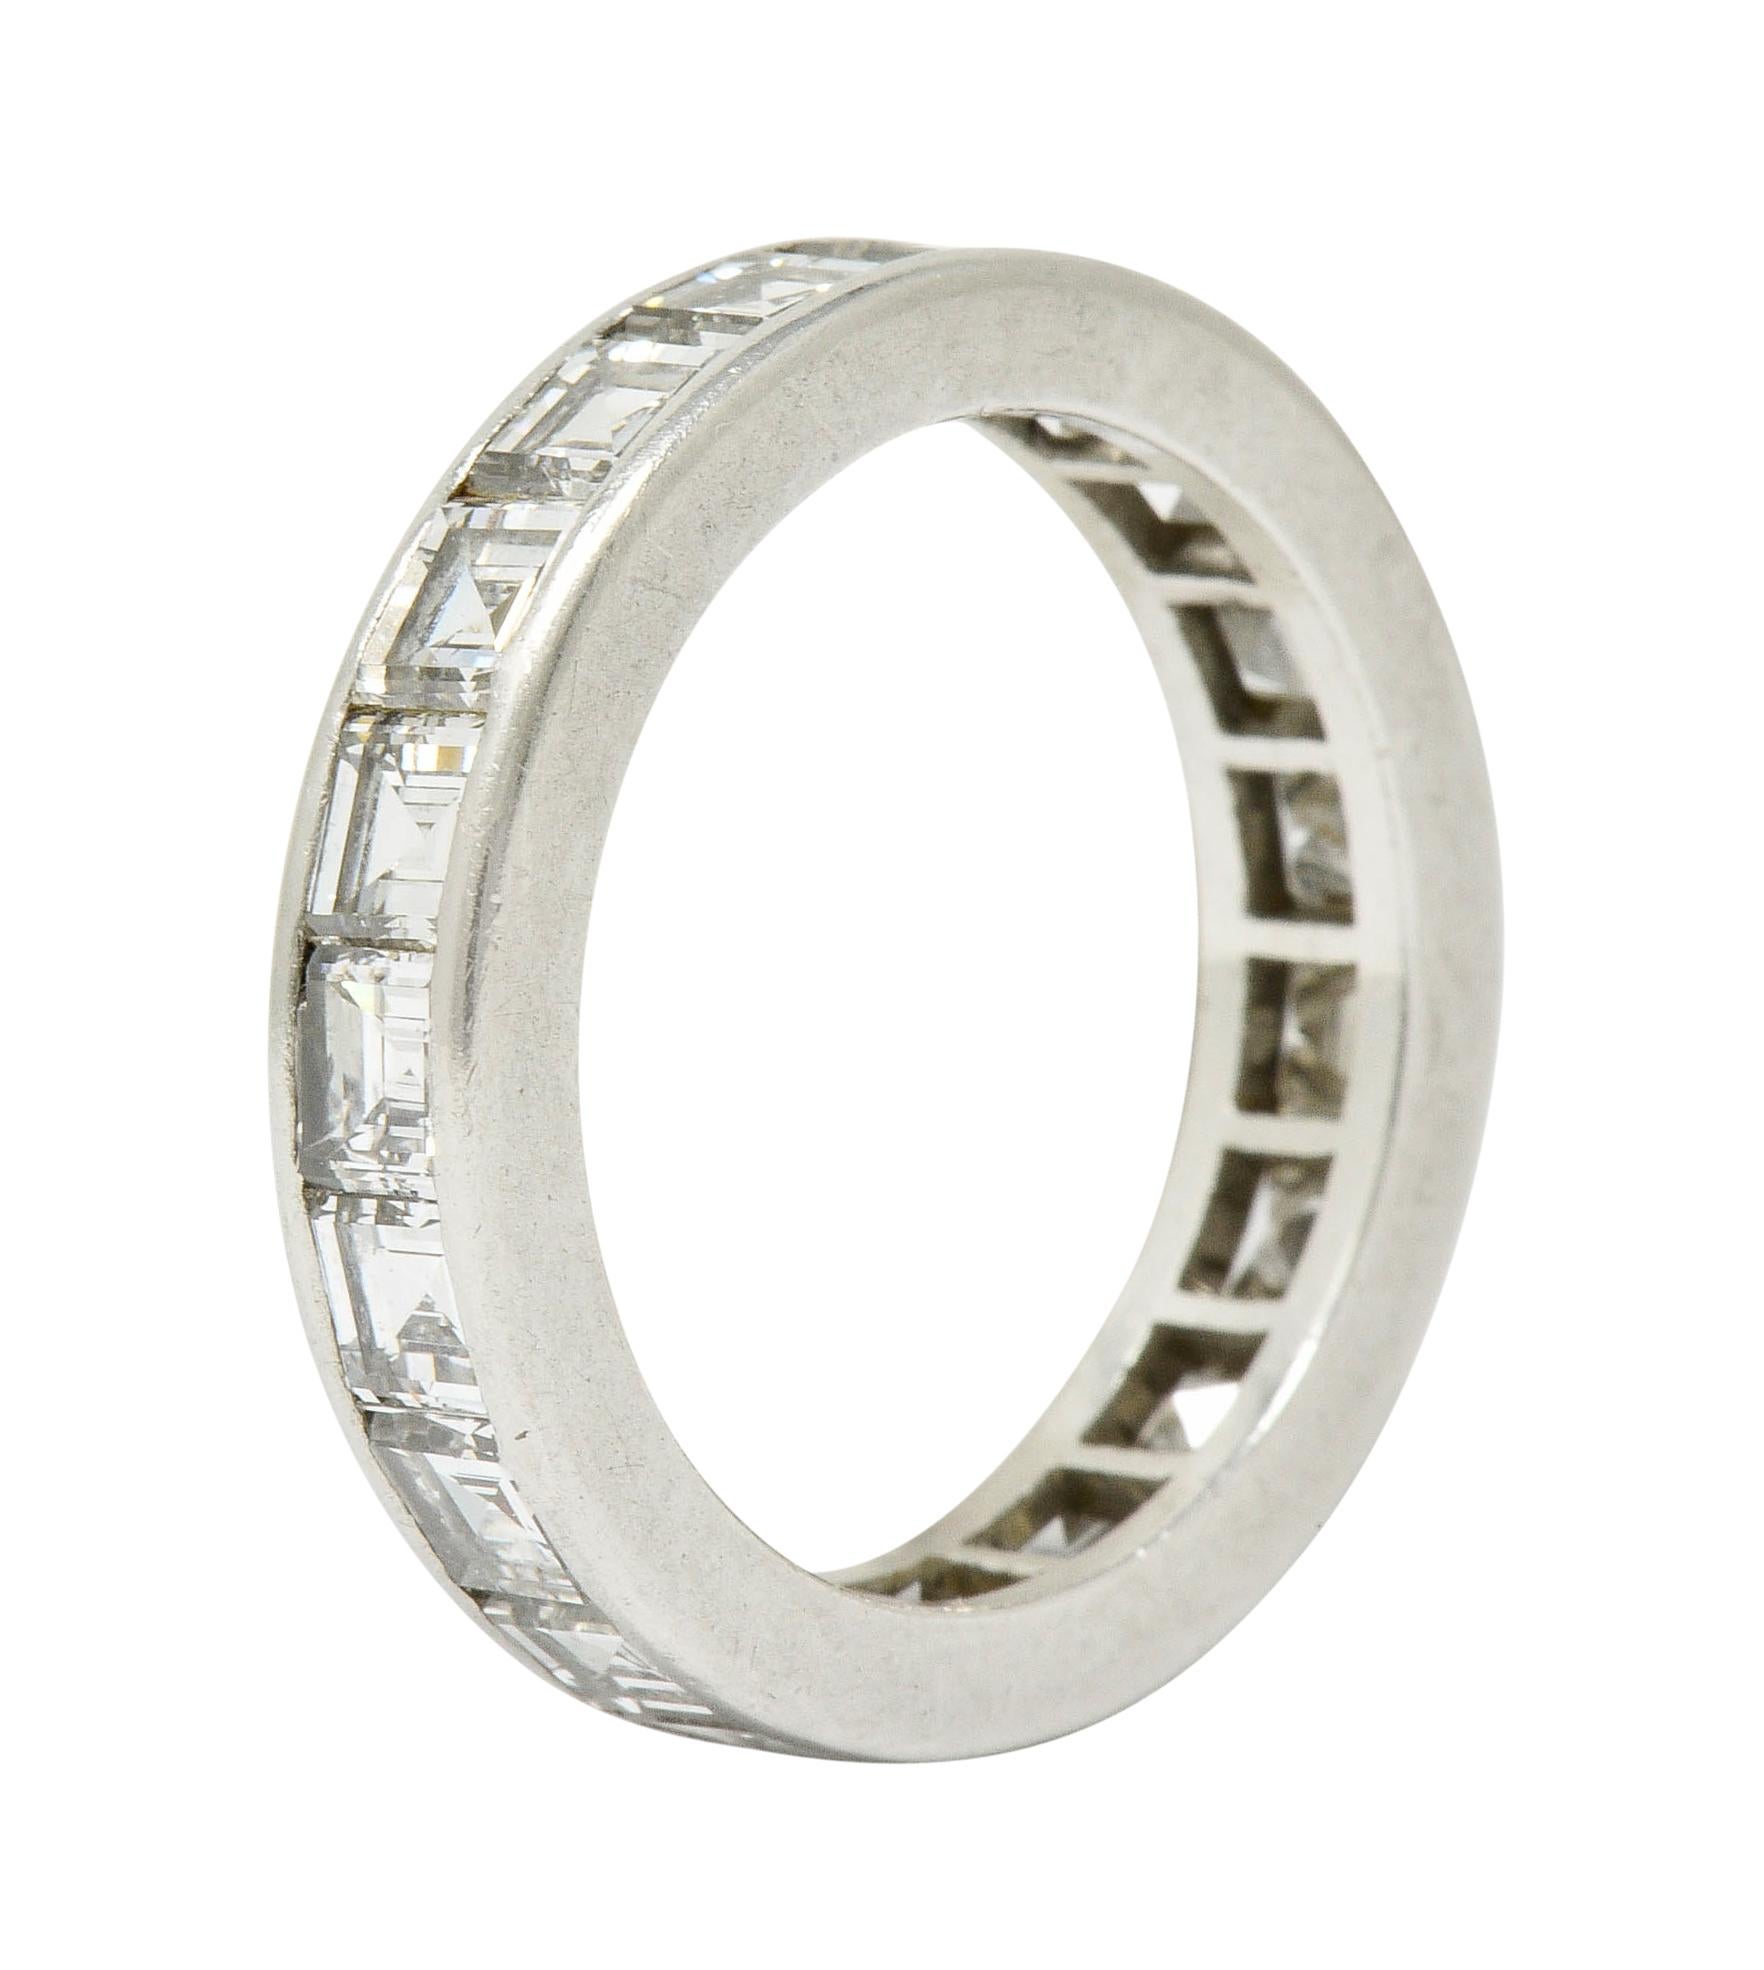 Eternity band ring is channel set fully around by rectangular step cut diamonds

Weighing in total approximately 3.80 carats with G to I color and VS clarity

Tested as platinum

Circa: 1950s

Ring Size: 7 1/2 & not sizable

Measures: 4.5 mm wide